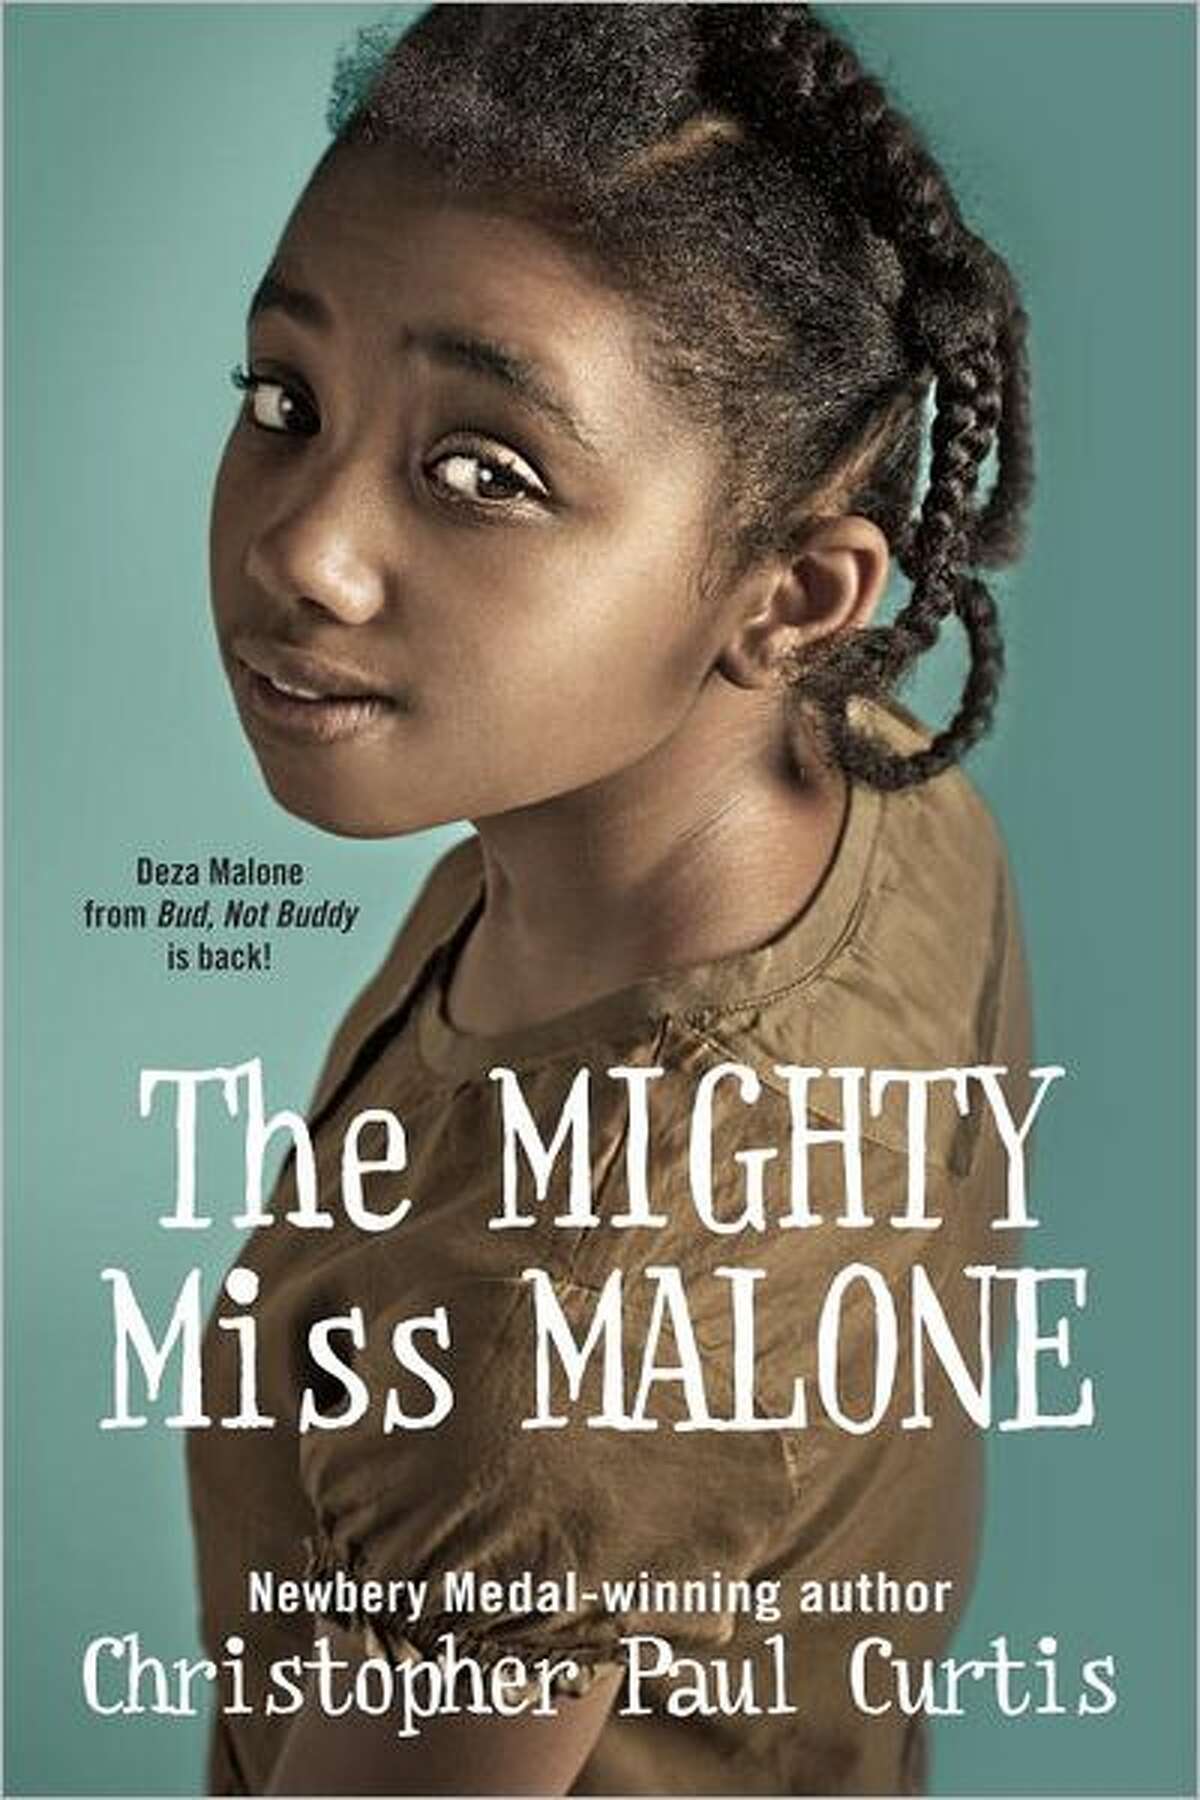 Book cover image for The Mighty Miss Malone, by Christopher Paul curtis; $15.99 Product Details Reading level: Ages 9 and up Hardcover: 320 pages Publisher: Wendy Lamb Books (January 10, 2012) Language: English